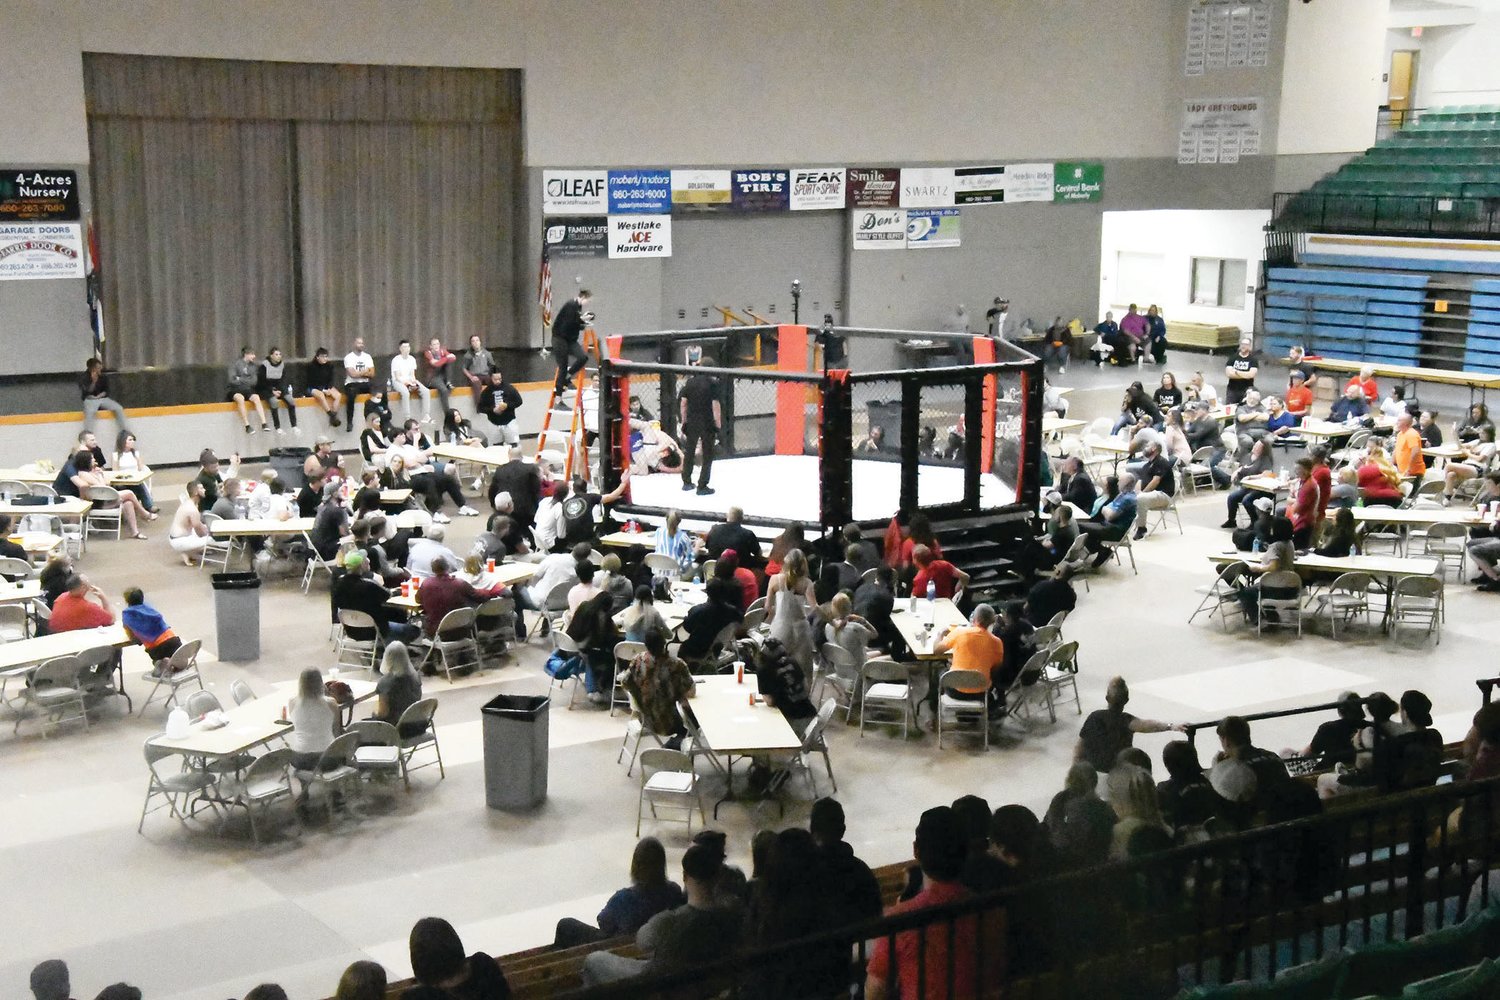 Here's the set up for Fight Show X at Fitzsimmons-John Arena on the Moberly Area Community College campus.